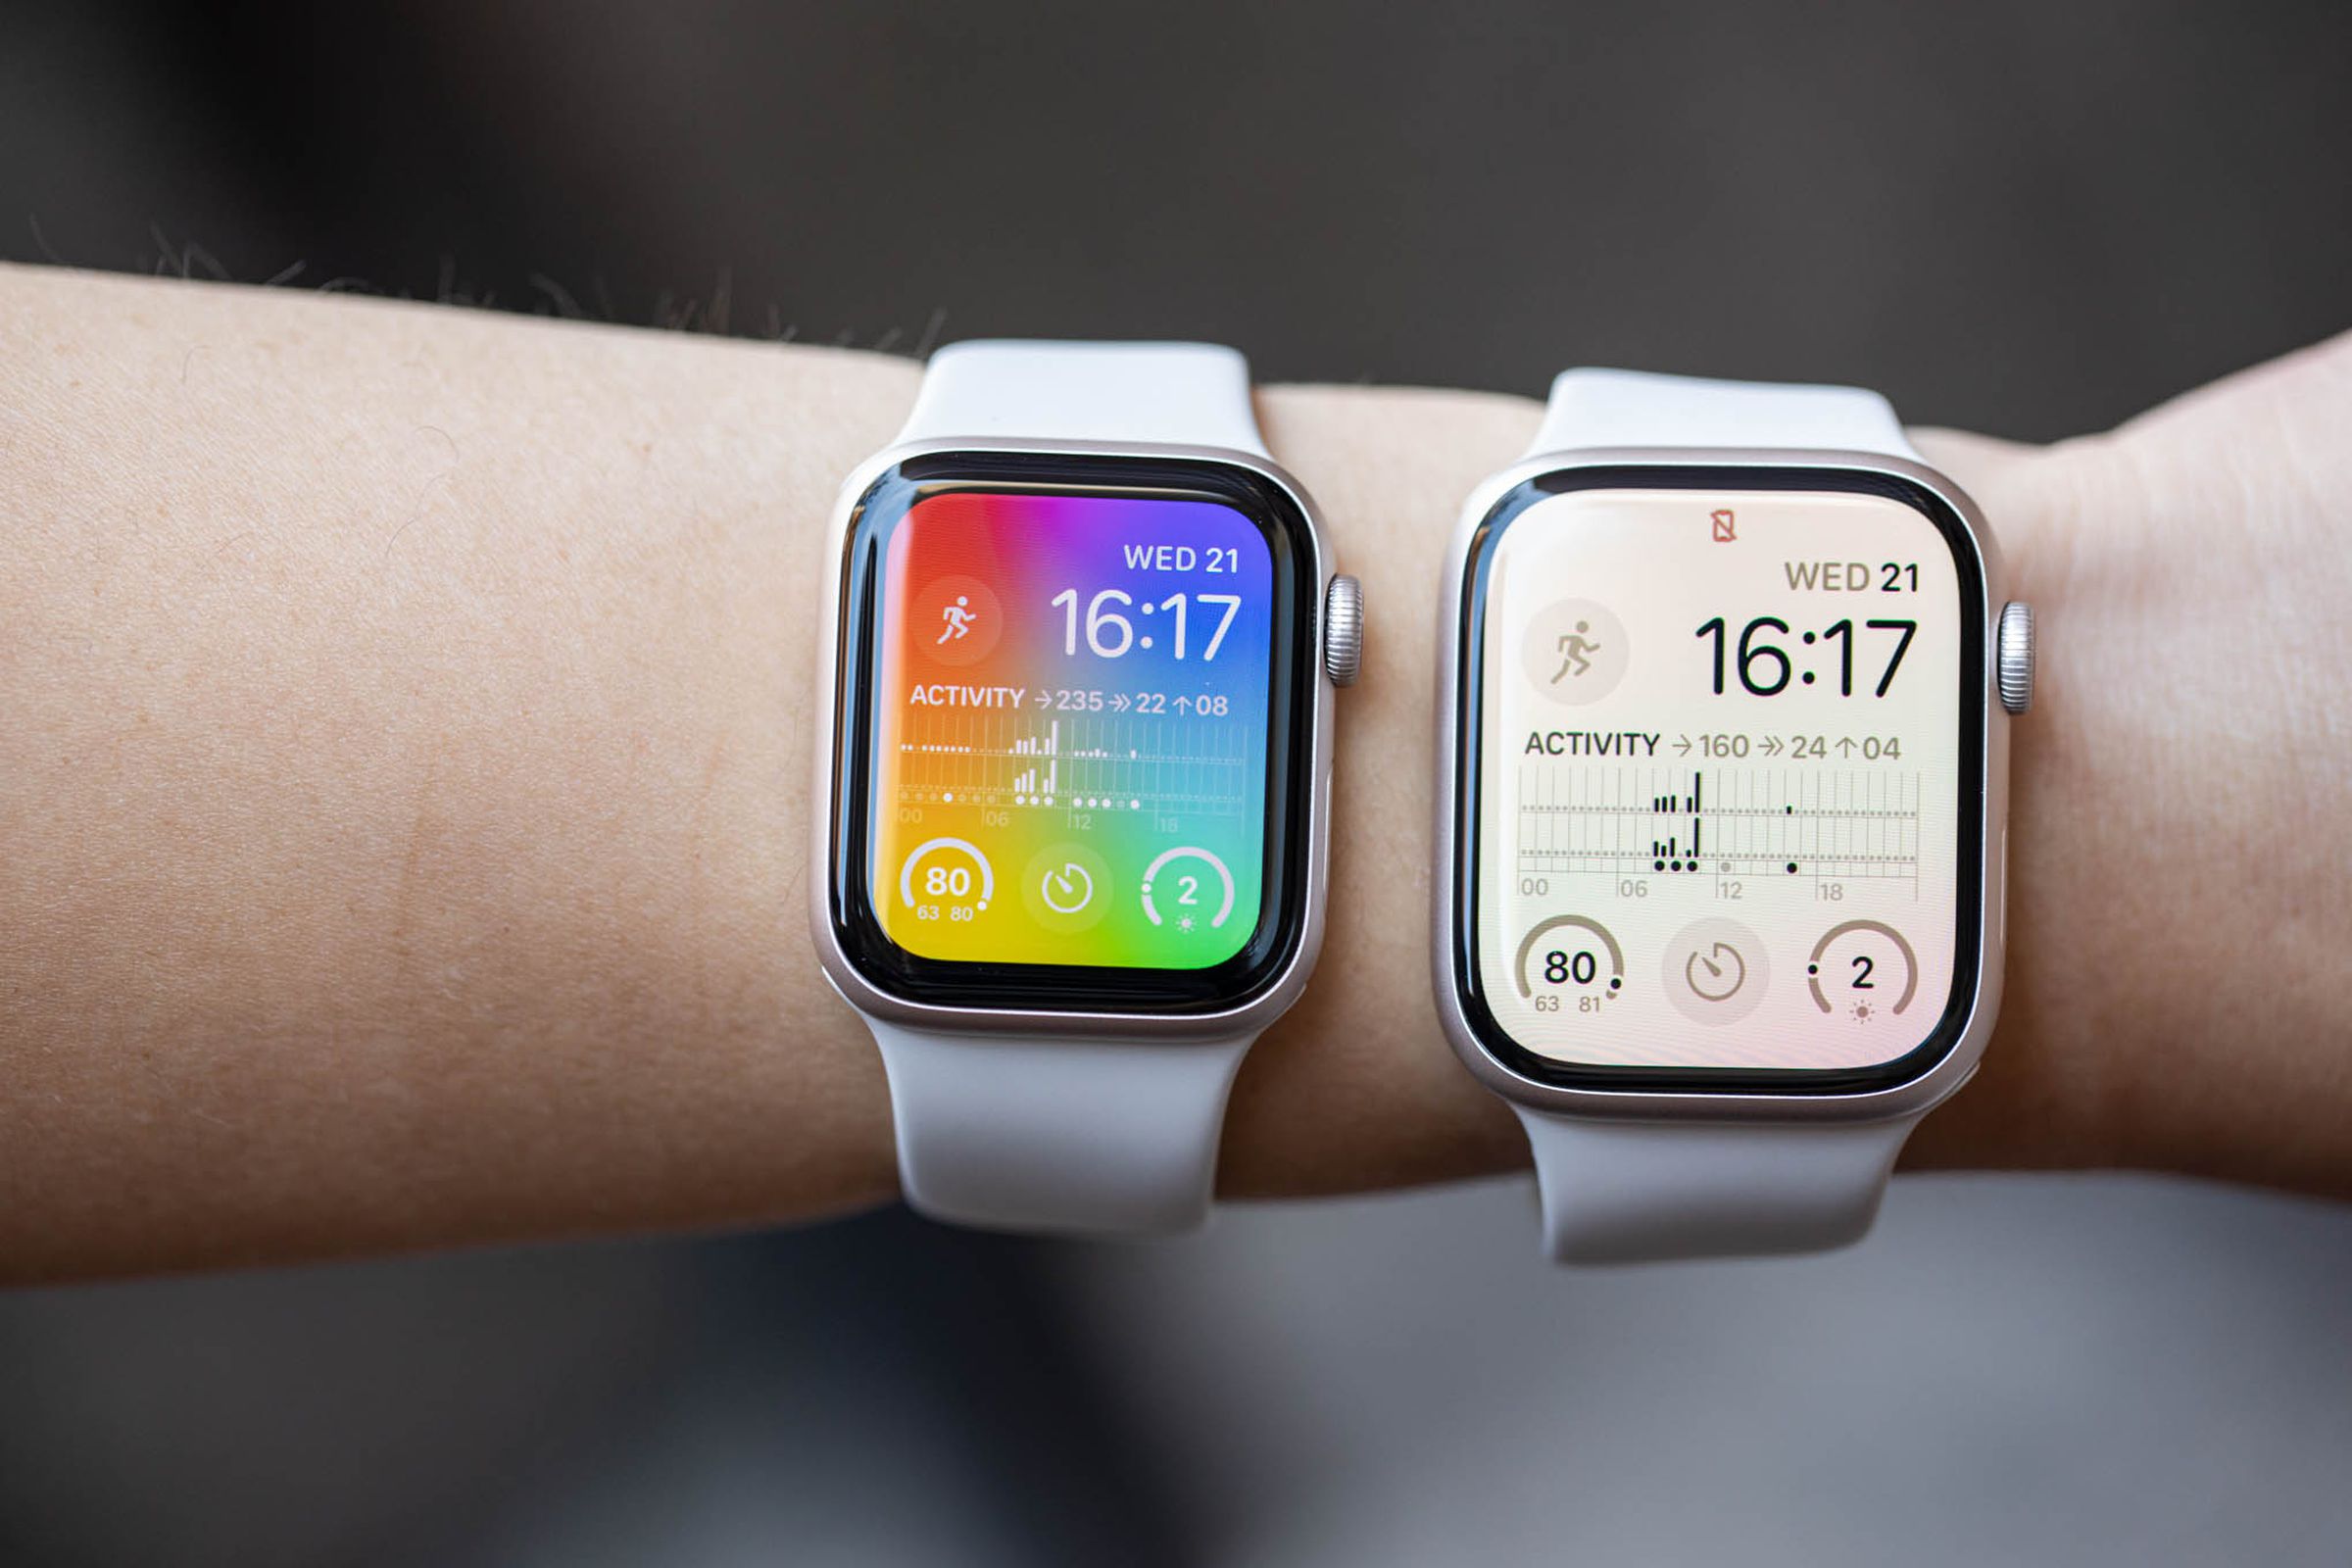 The Apple Watch SE (2022) and the 45mm Apple Watch Series 8 using the same watchface, side by side.